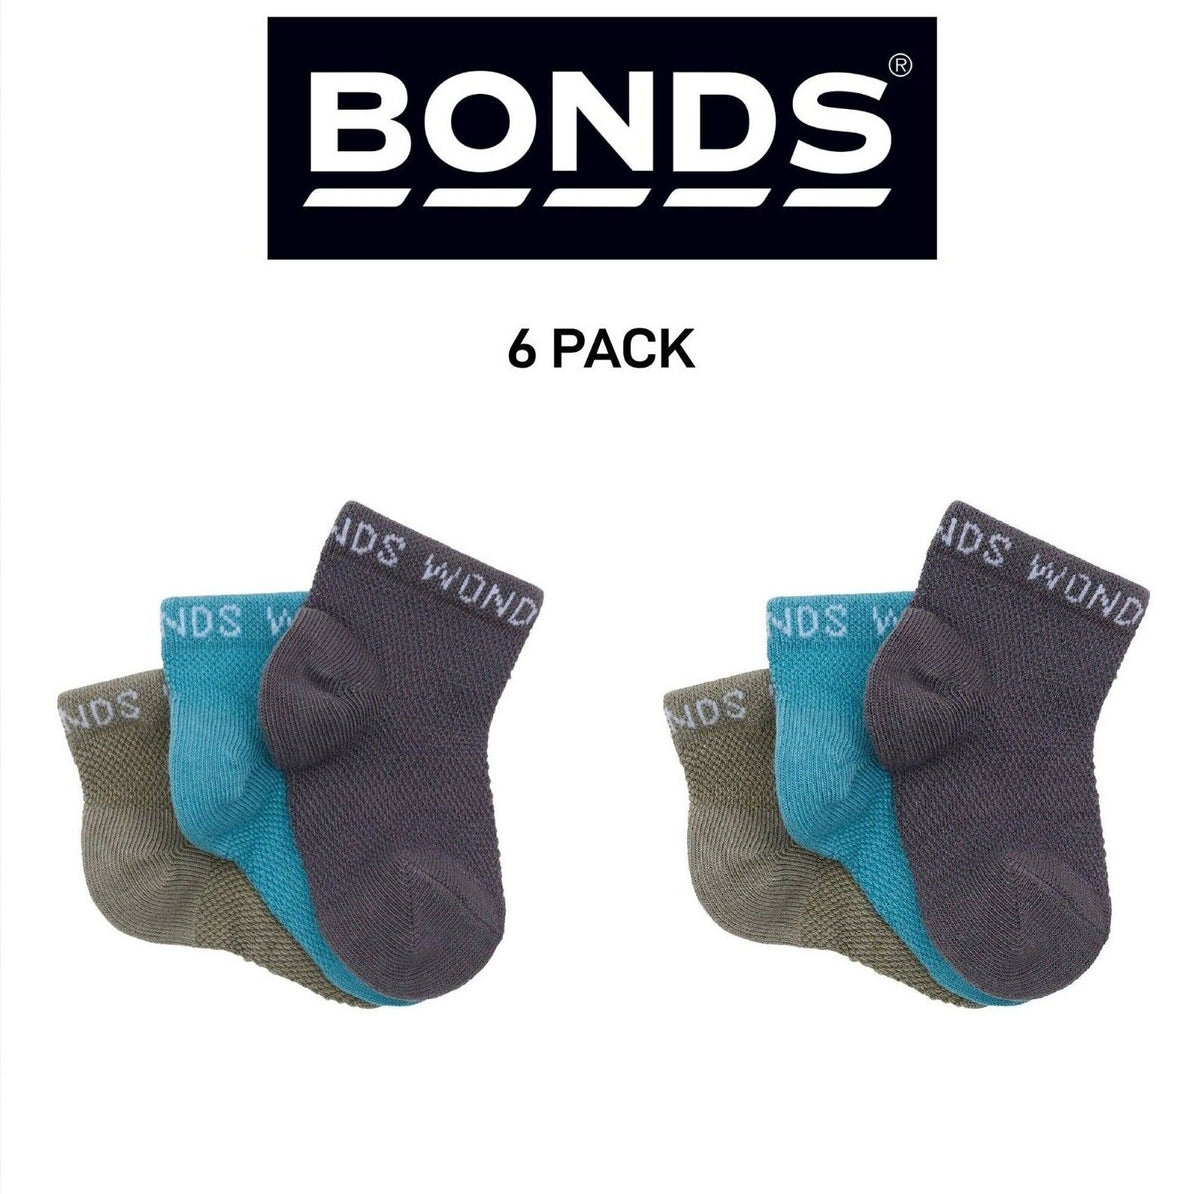 Bonds Baby Wondercool Low Cut Socks Breathable Soft Natural Cotton 6 Pack RXWN3N